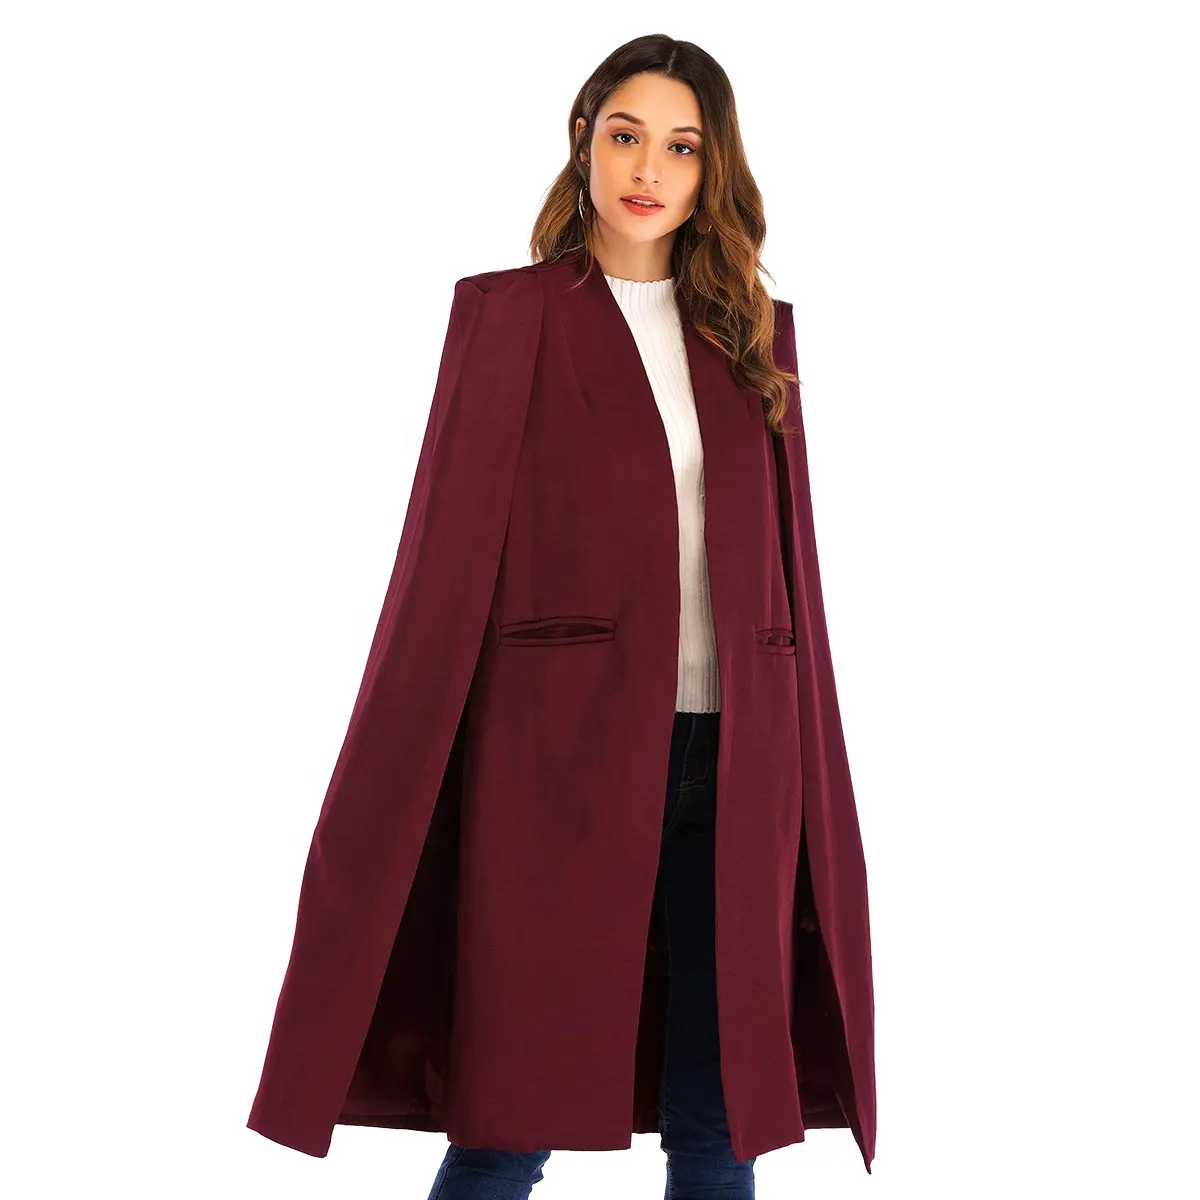 Customized temperament commuting solid color cape lengthened women's cape trench coat cloak coat